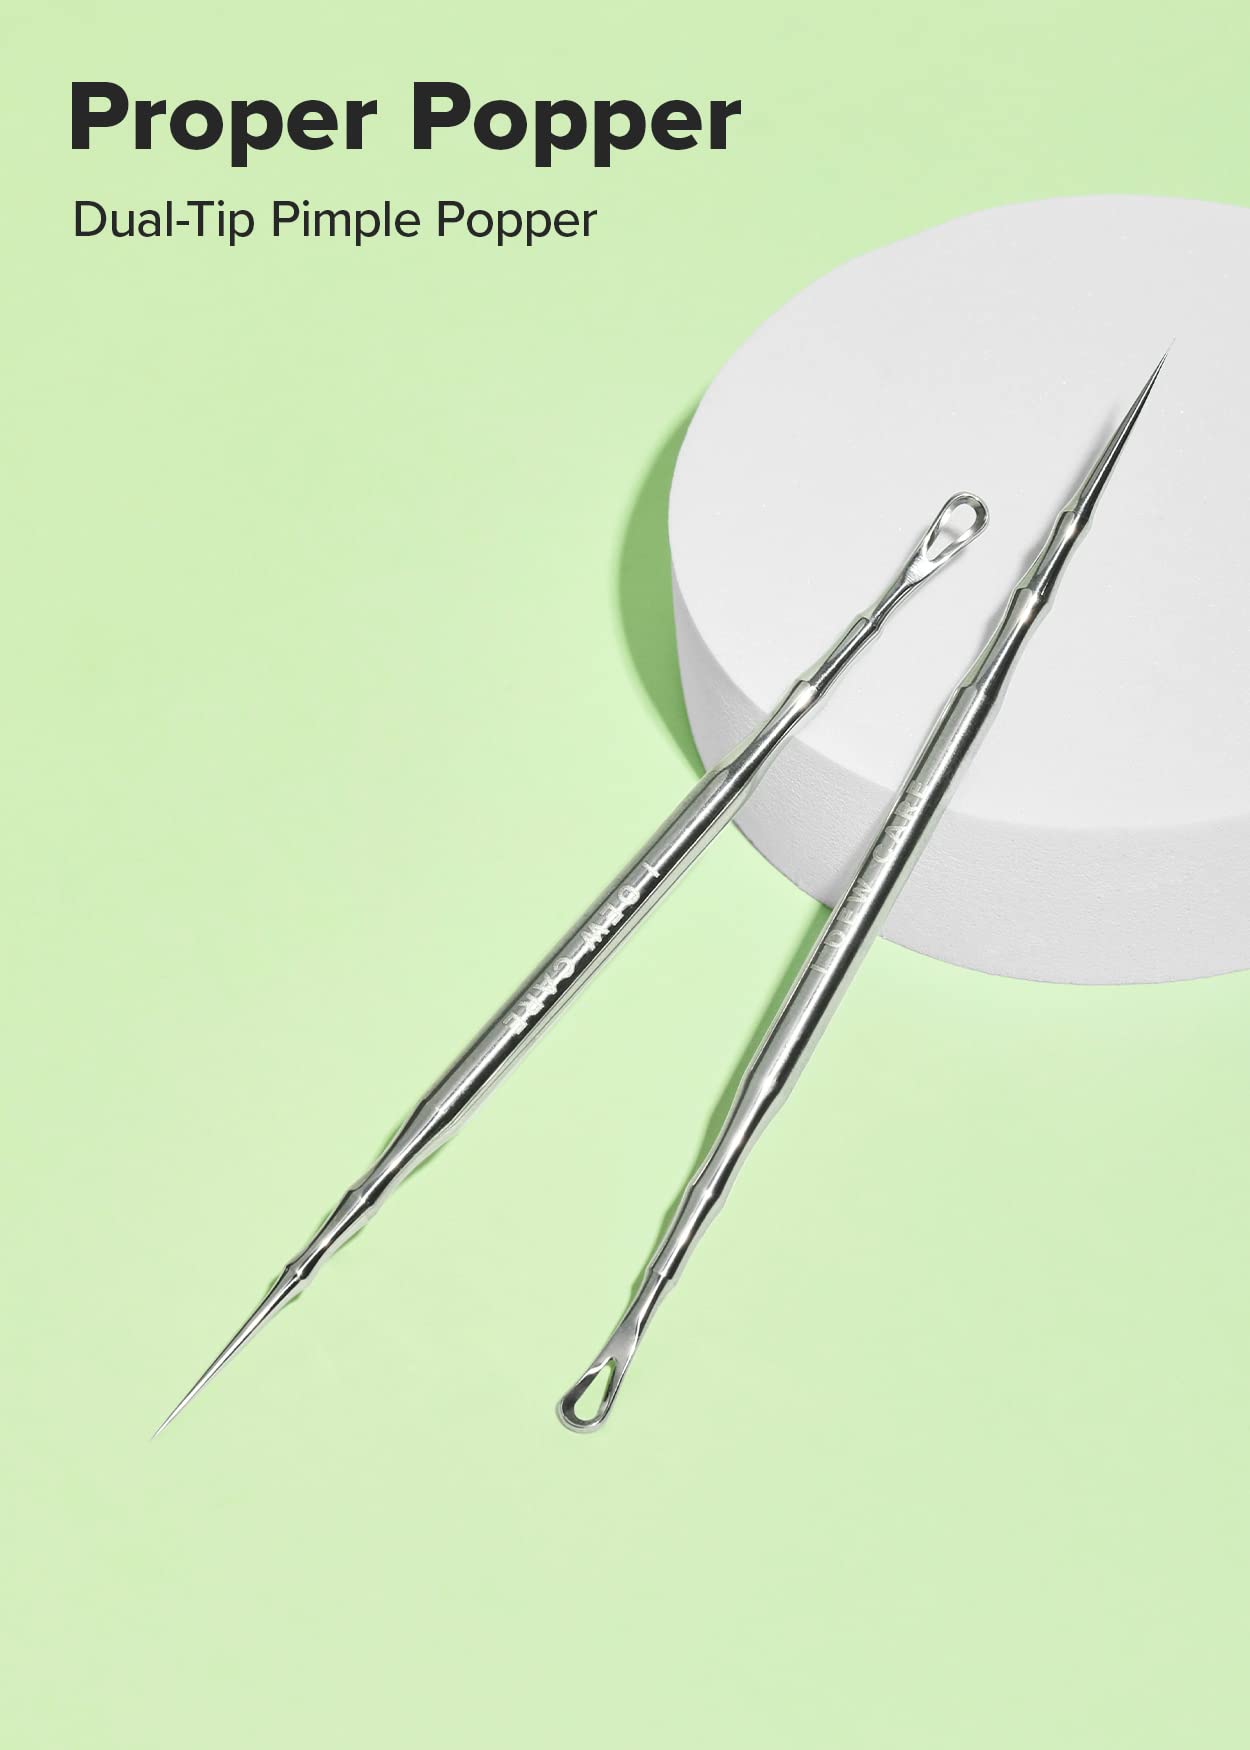 I Dew Care Dual-Tip Pimple Popper - Proper Popper | Blackhead Remover, Pimple Popper, 2-in-1 Stainless Steel Extractor, 1 EA